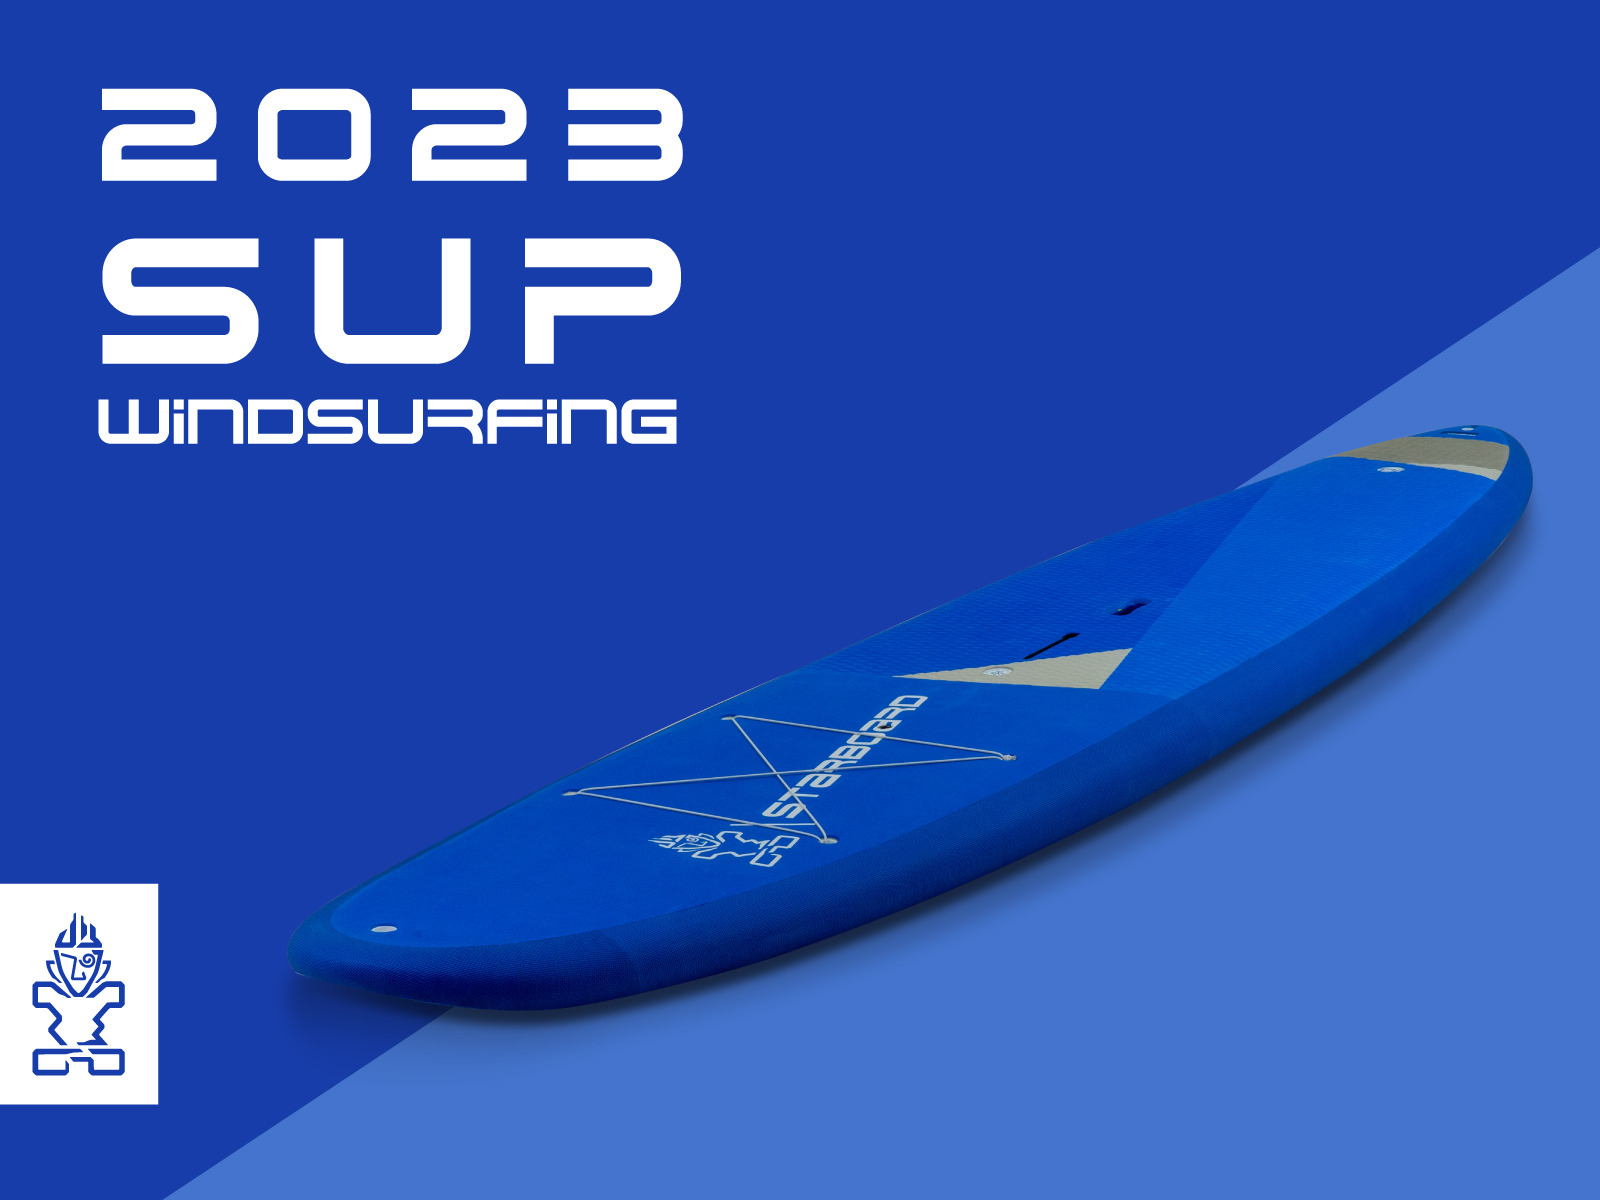 2023 SUP Windsurfing » Starboard SUP